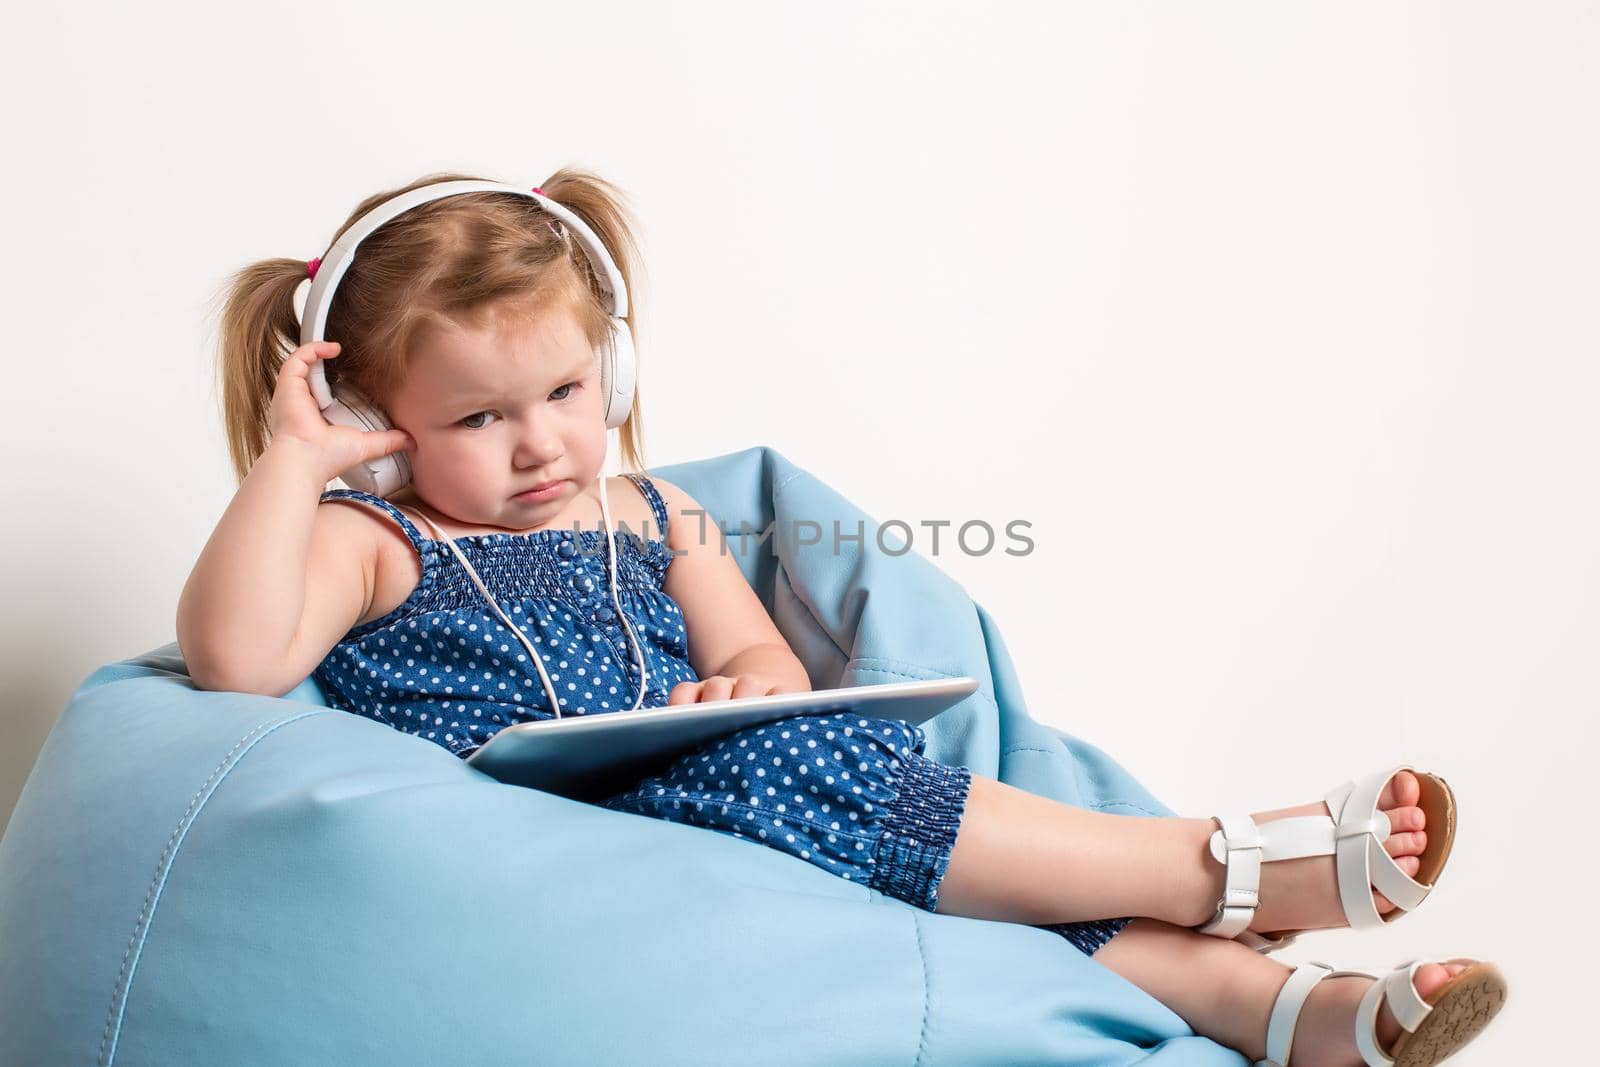 Cute little girl in headphones listening to music using a tablet and smiling while sitting on blue big bag. On white background.